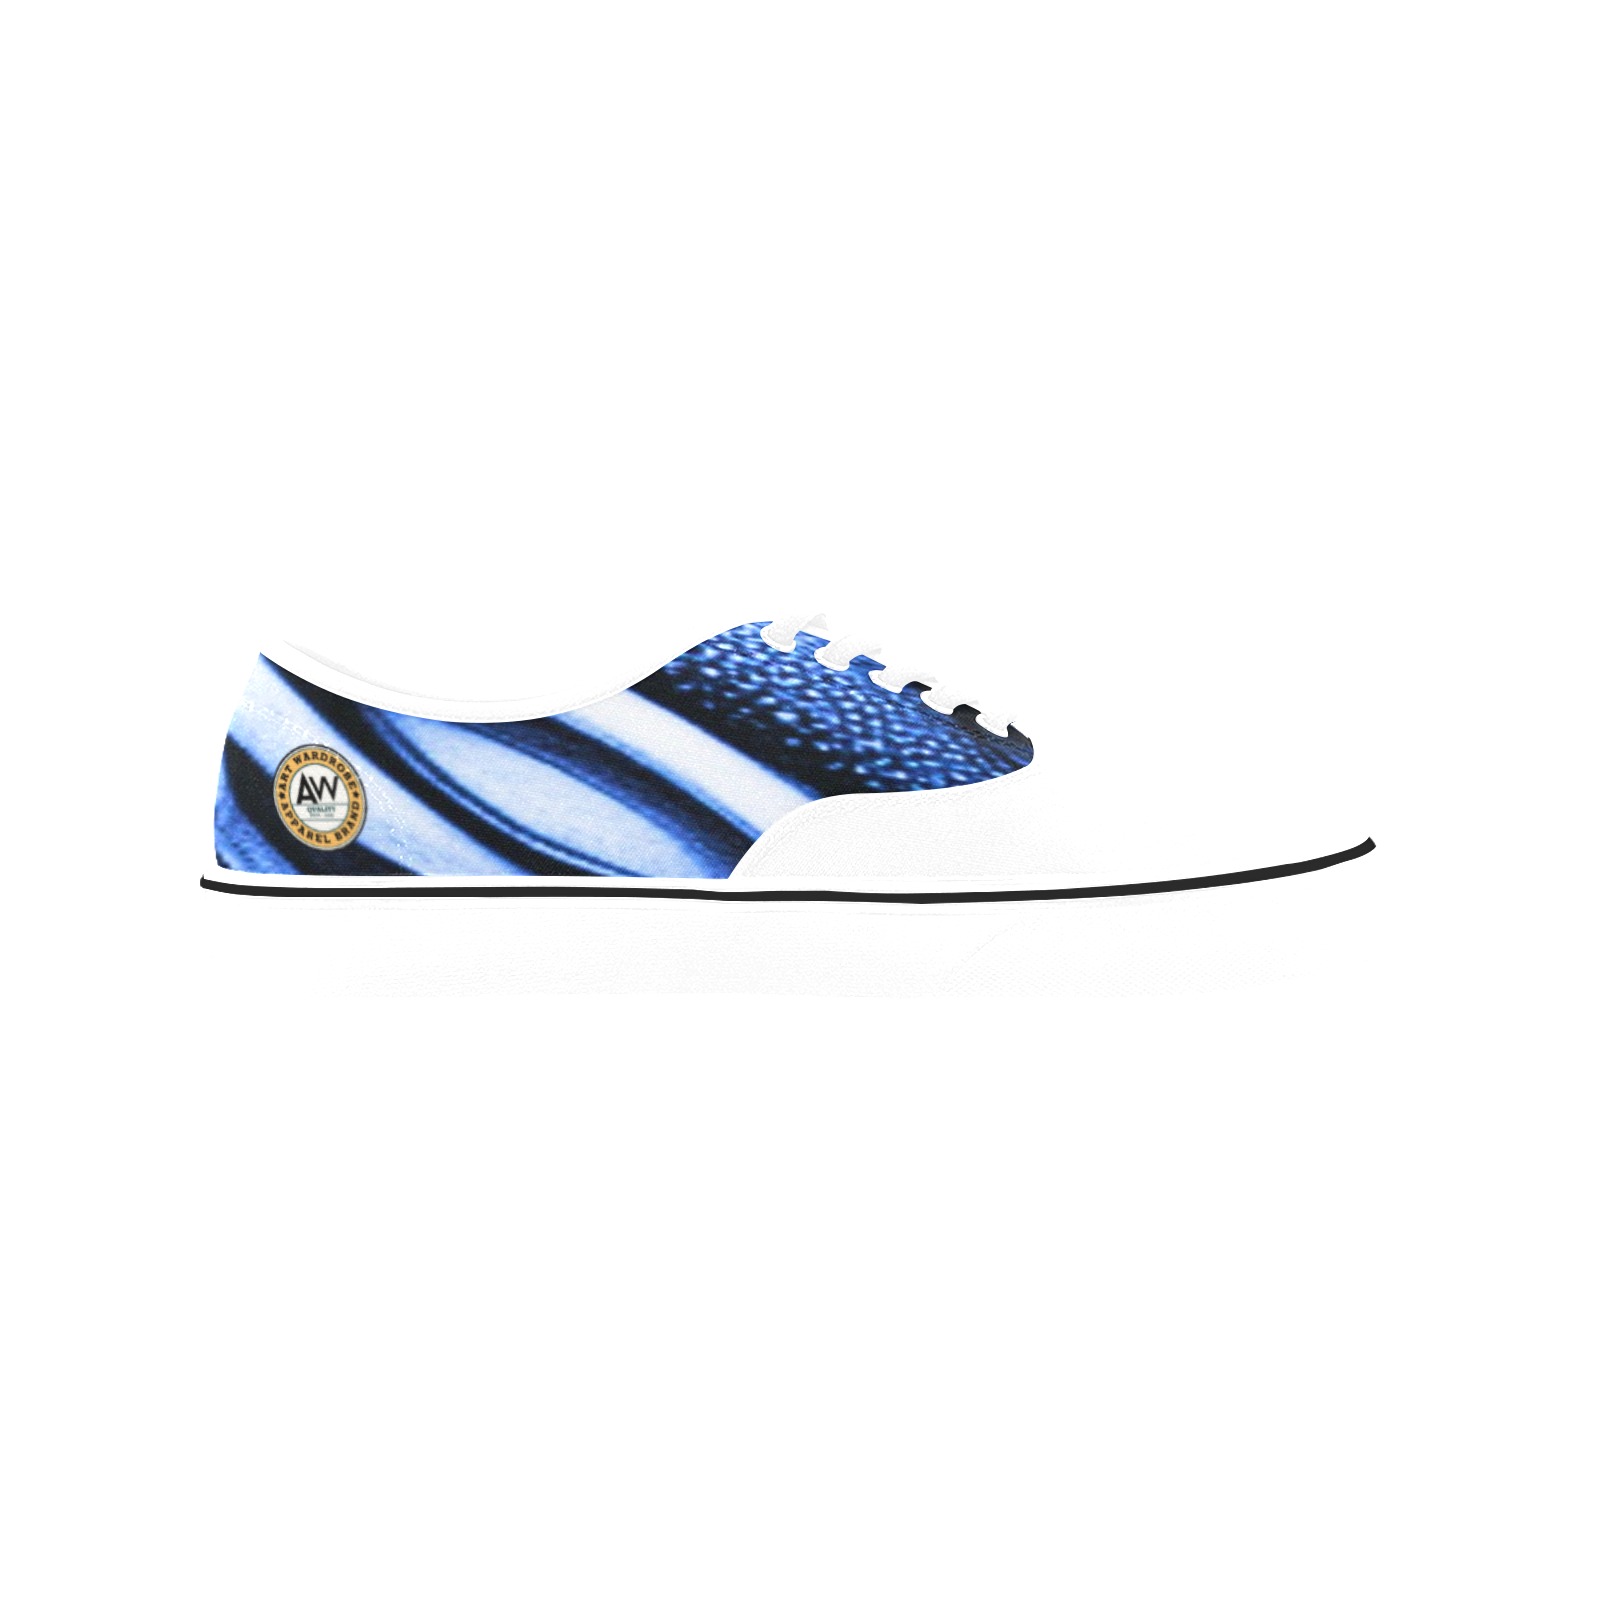 blue and white striped pattern Classic Women's Canvas Low Top Shoes (Model E001-4)